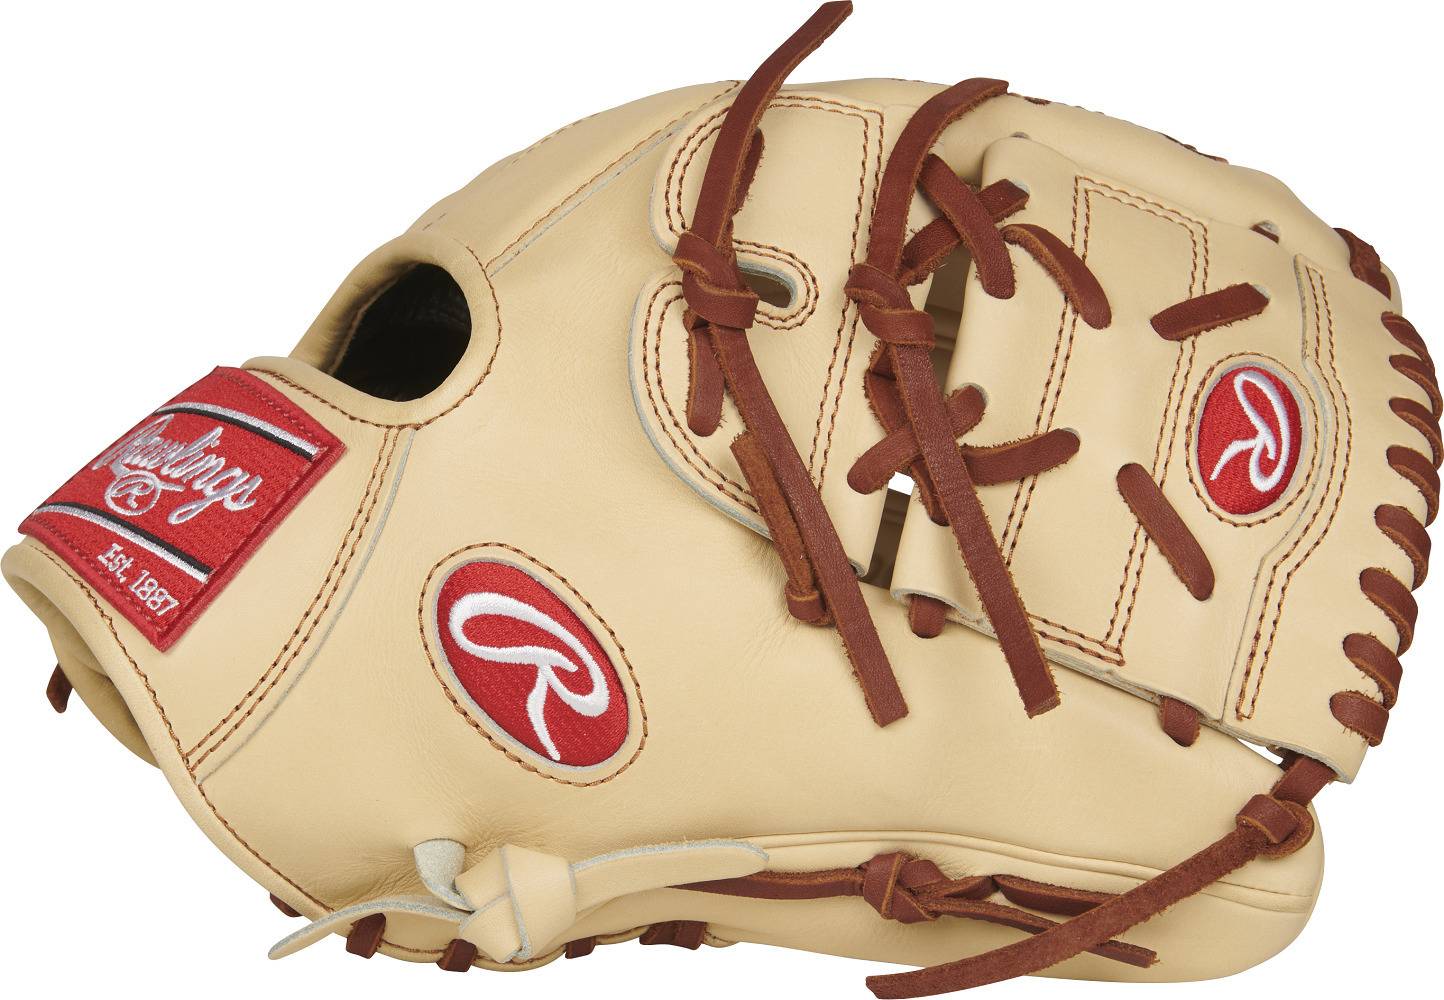 Rawlings Pro Preferred 11.75" Pitcher Baseball Glove (Right Hand Throw)